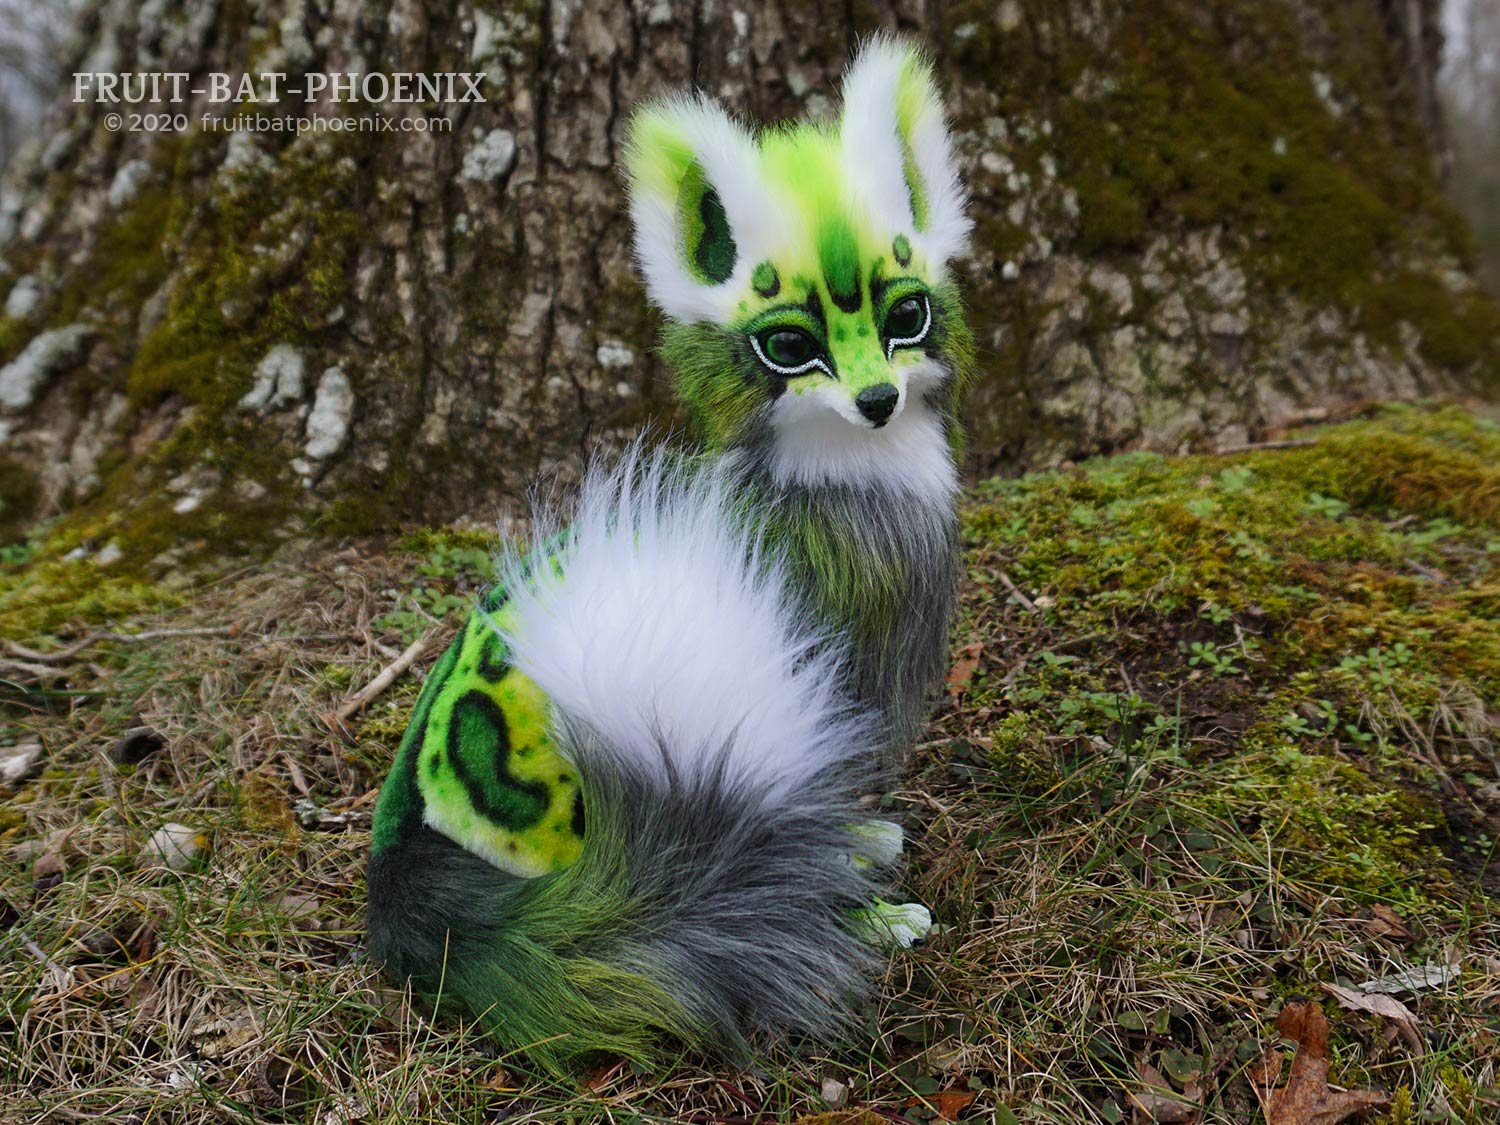 Chlorophyll Fox the posable creature sitting.